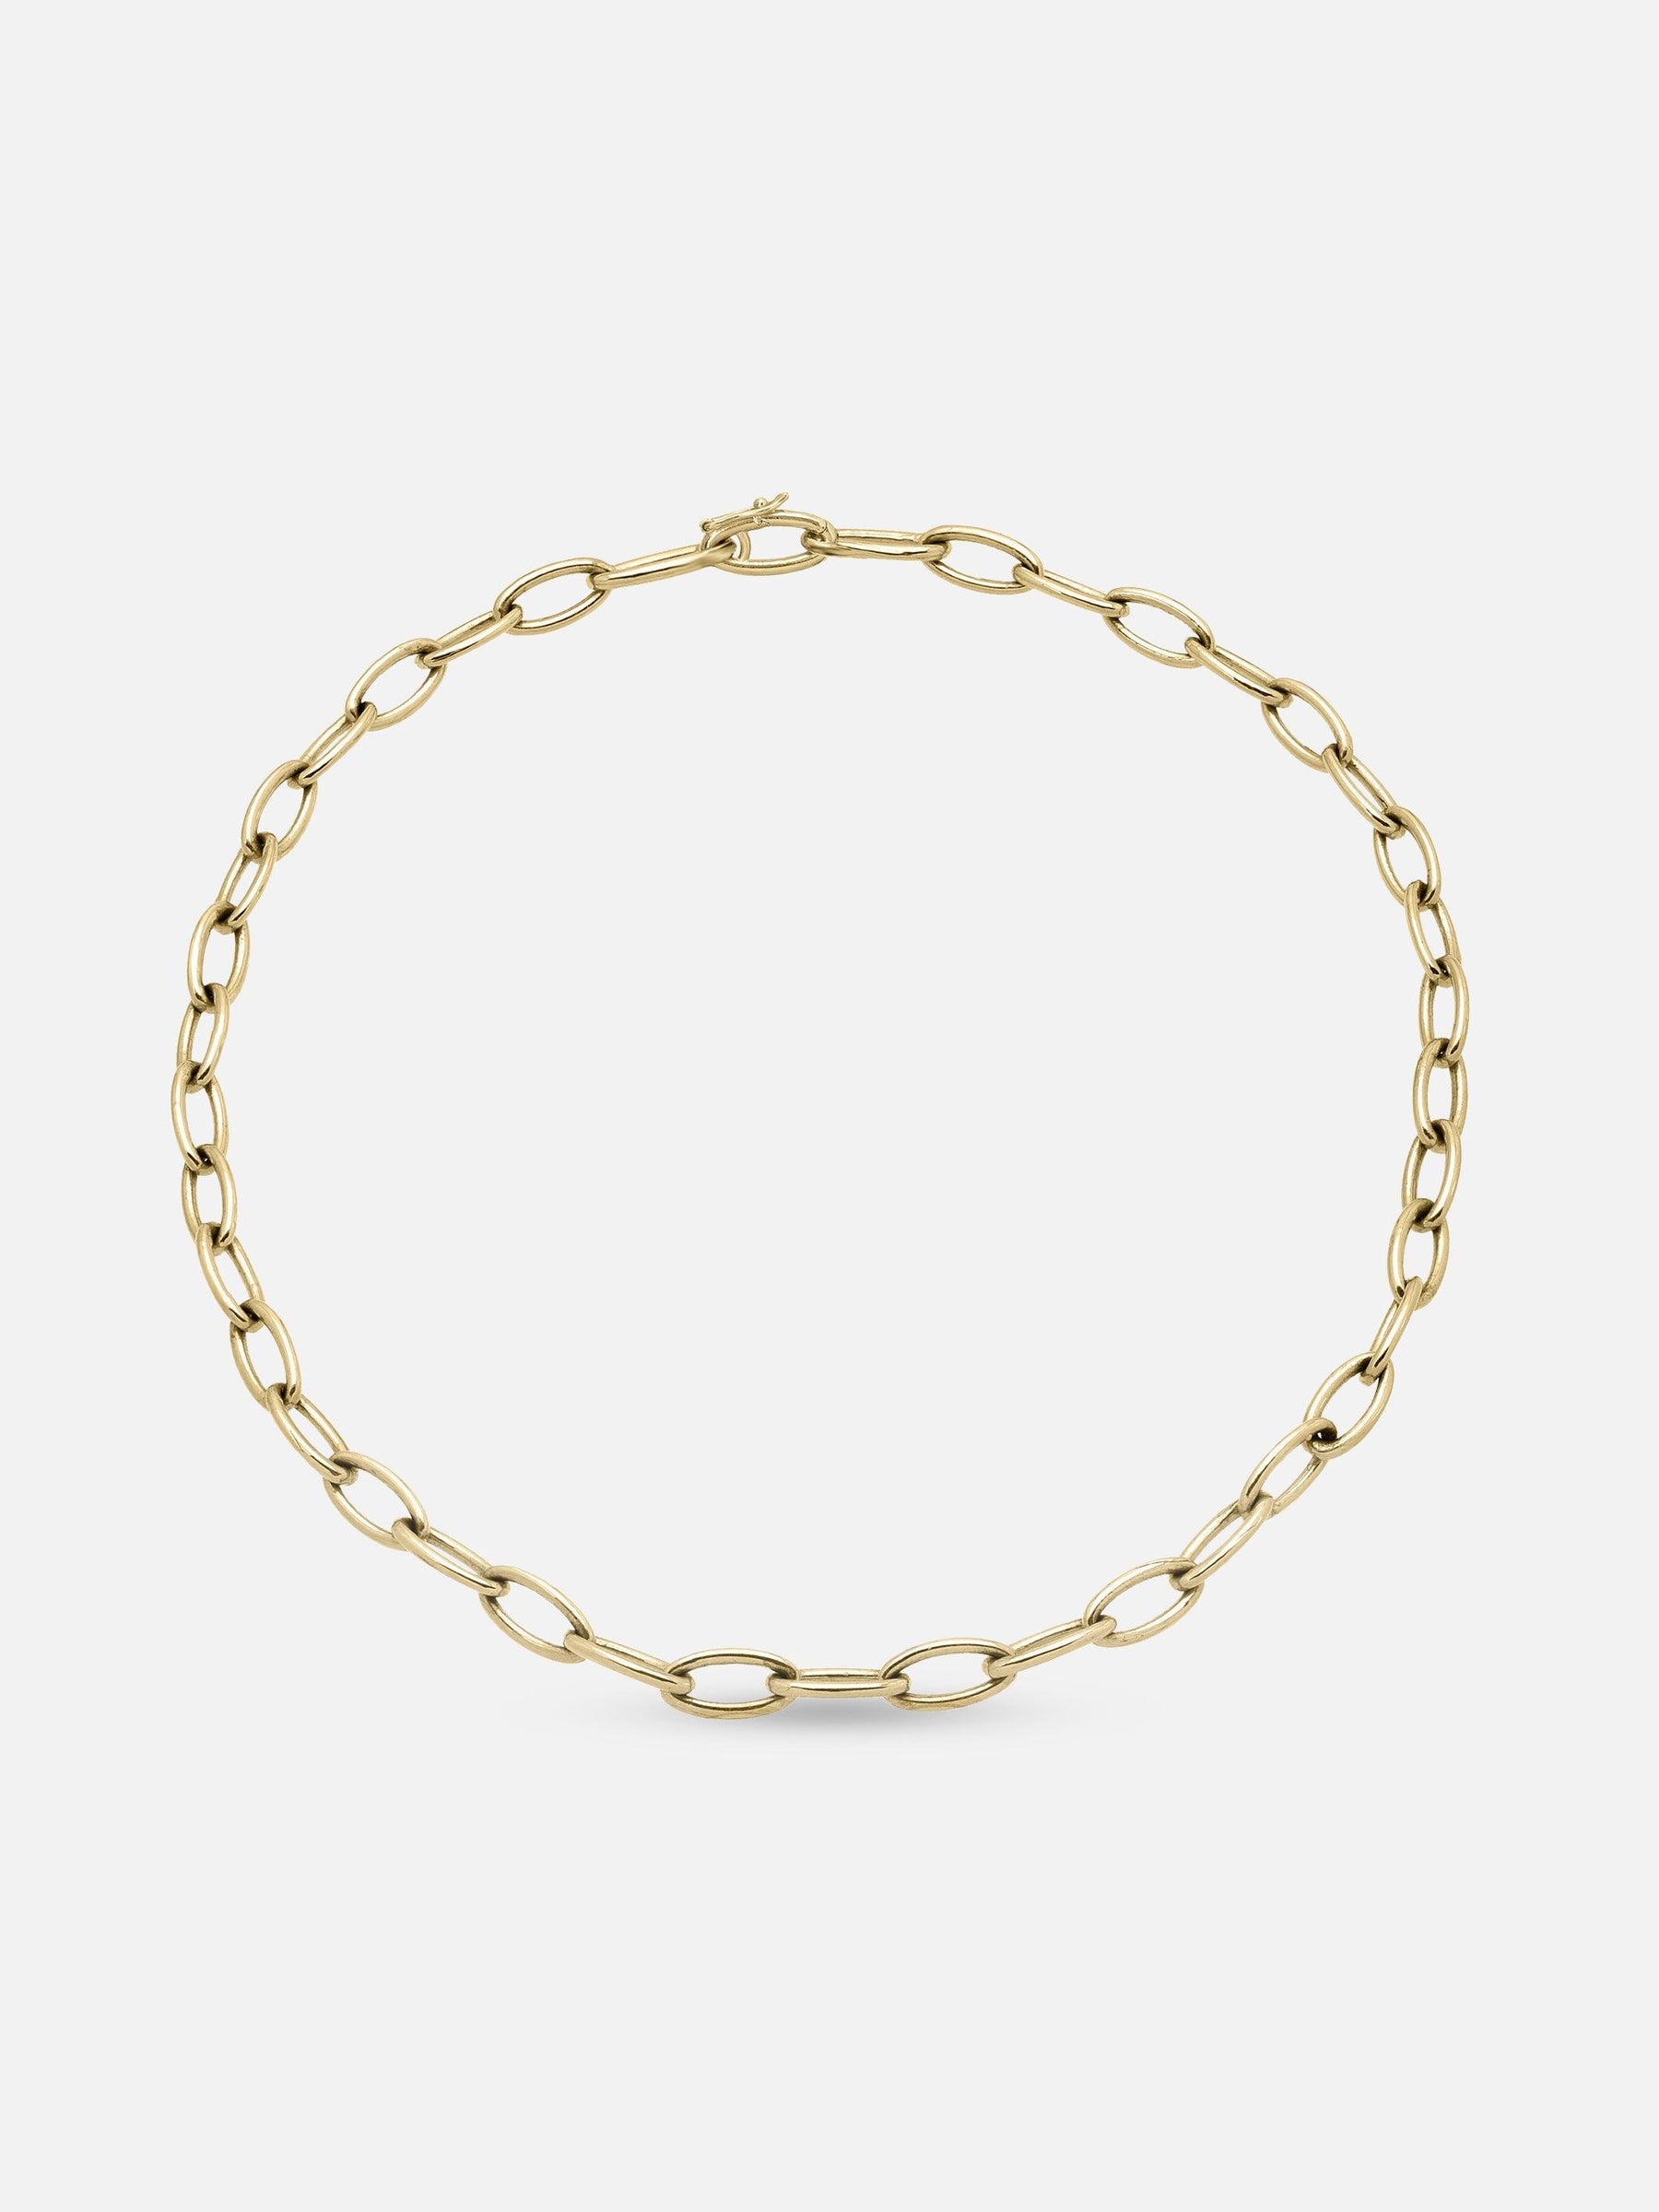 Stacy Nolan Oval Link Chain Necklace 1